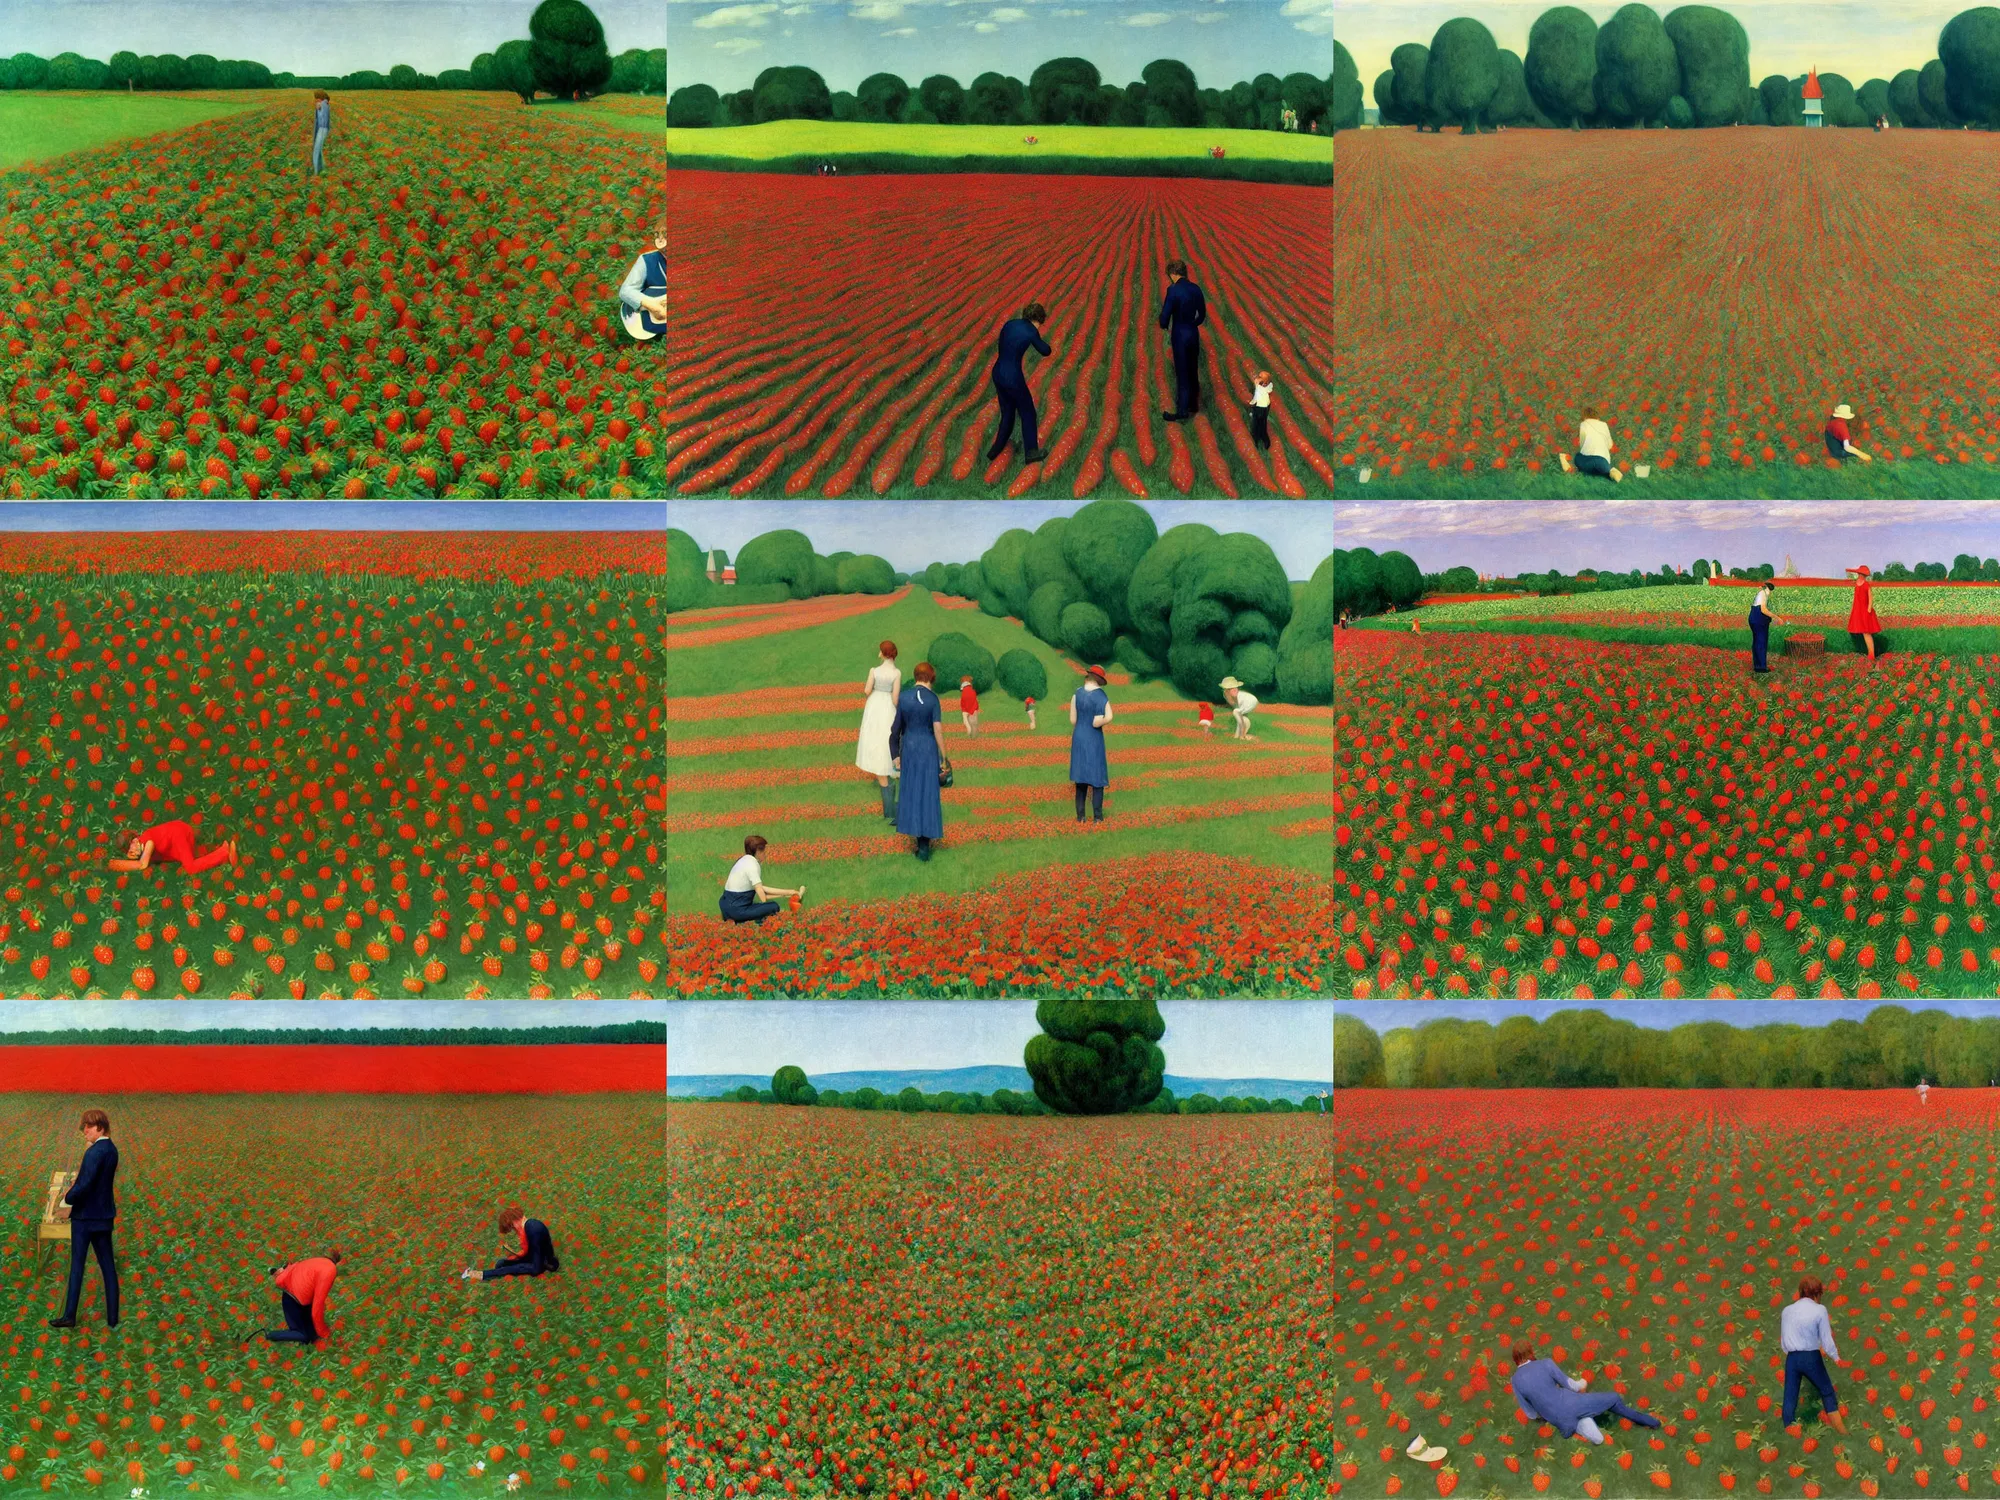 Prompt: john lennon playing strawberry fields forever in a strawberry field full of giant strawberries to a crowd of many heather locklears, painting by edward hopper and james jean